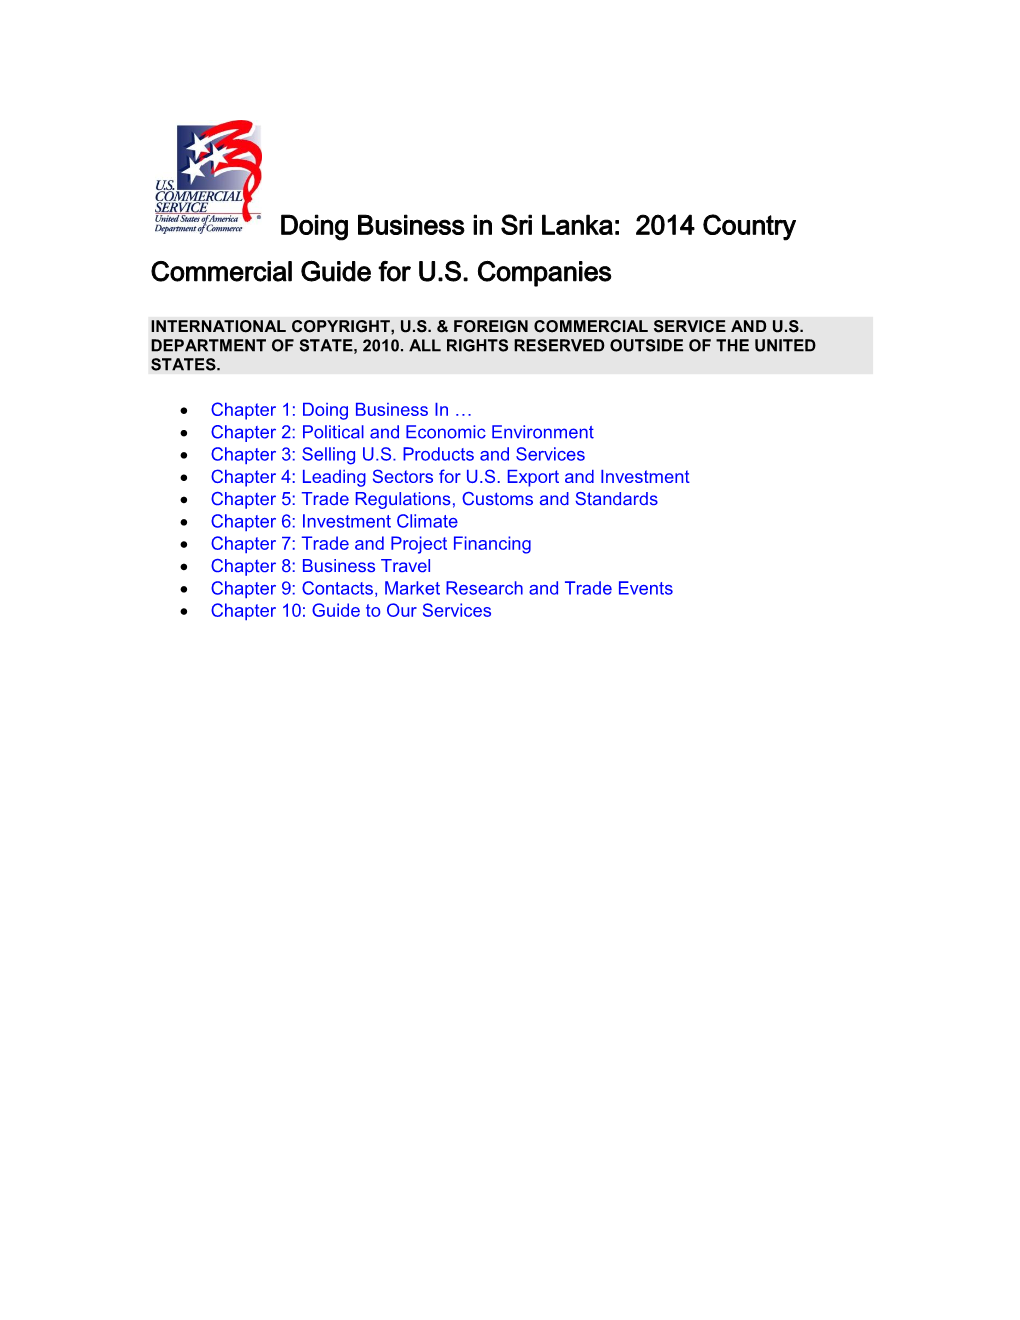 Doing Business in Sri Lanka: 2014 Country Commercial Guide for U.S